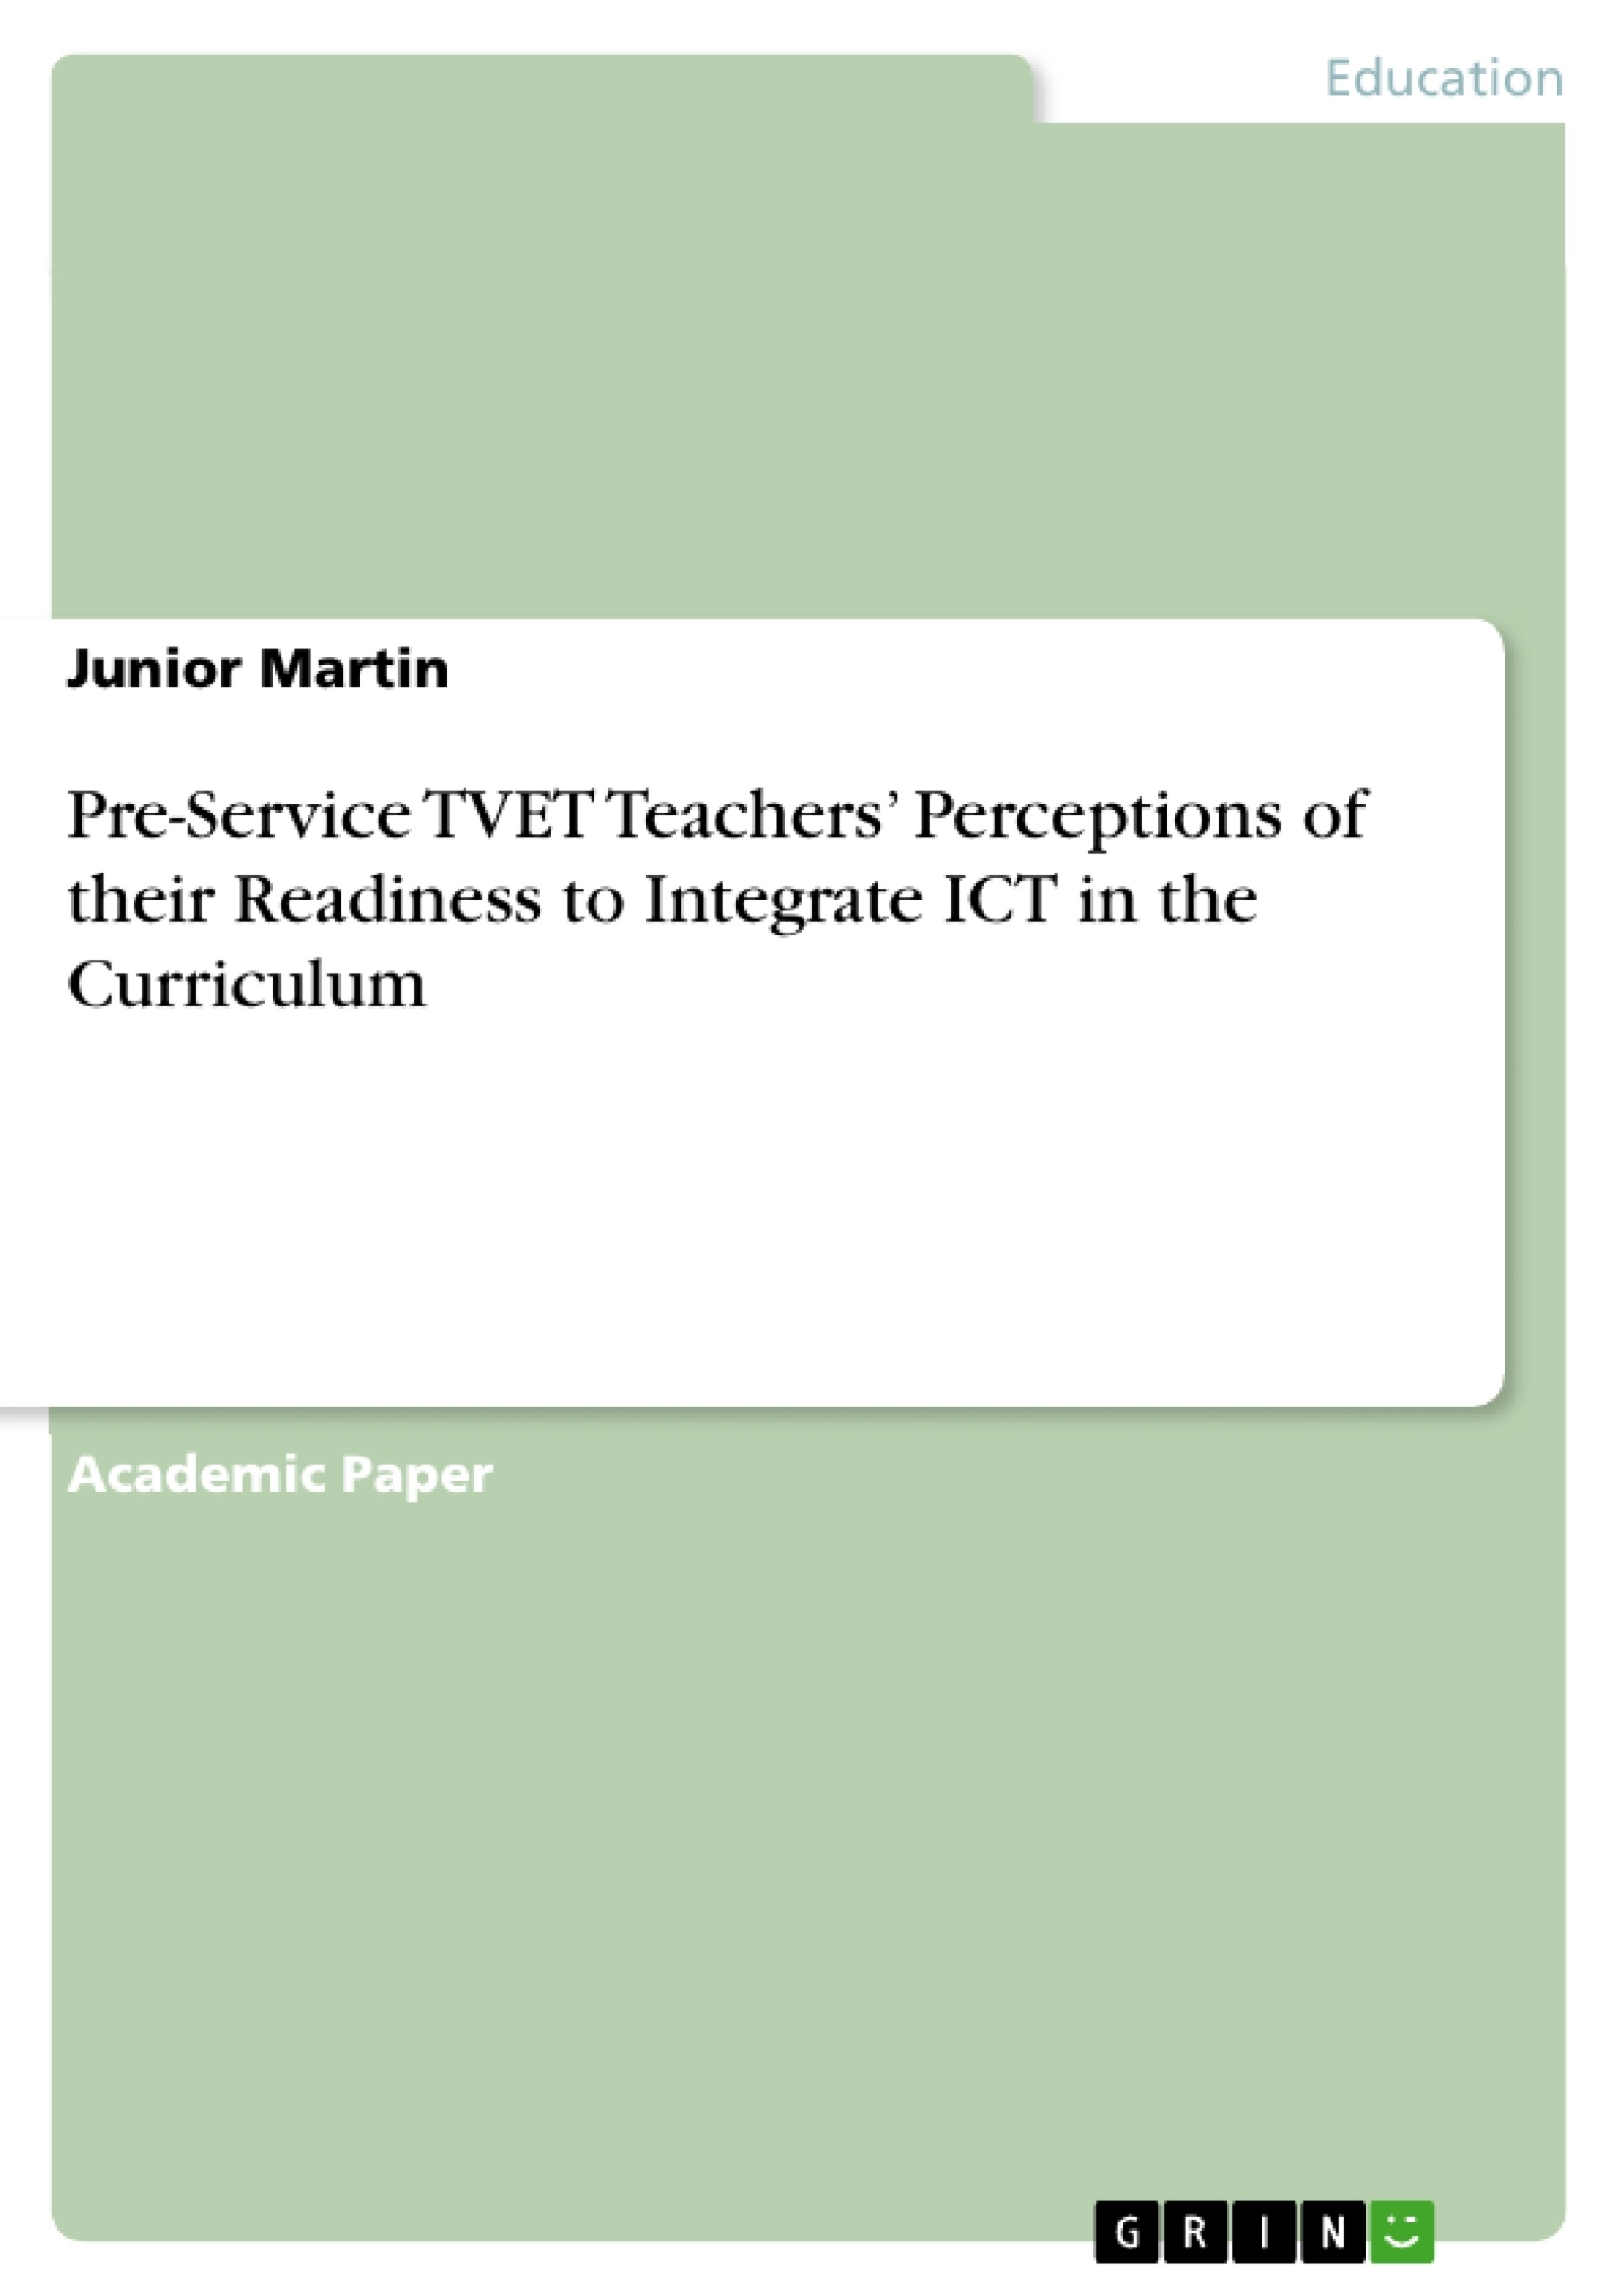 Título: Pre-Service TVET Teachers’ Perceptions of their Readiness to Integrate ICT in the Curriculum